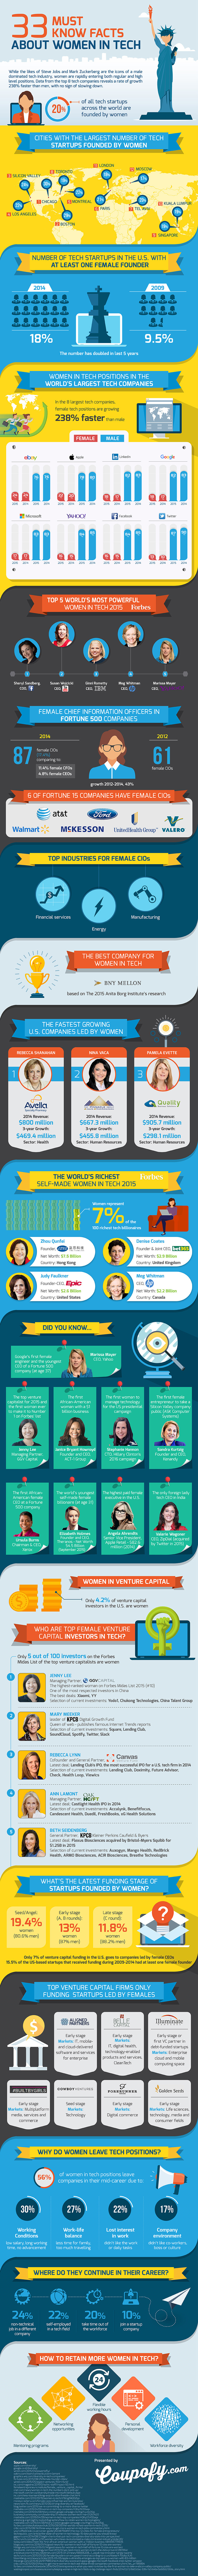 33 Facts About Women in Technology